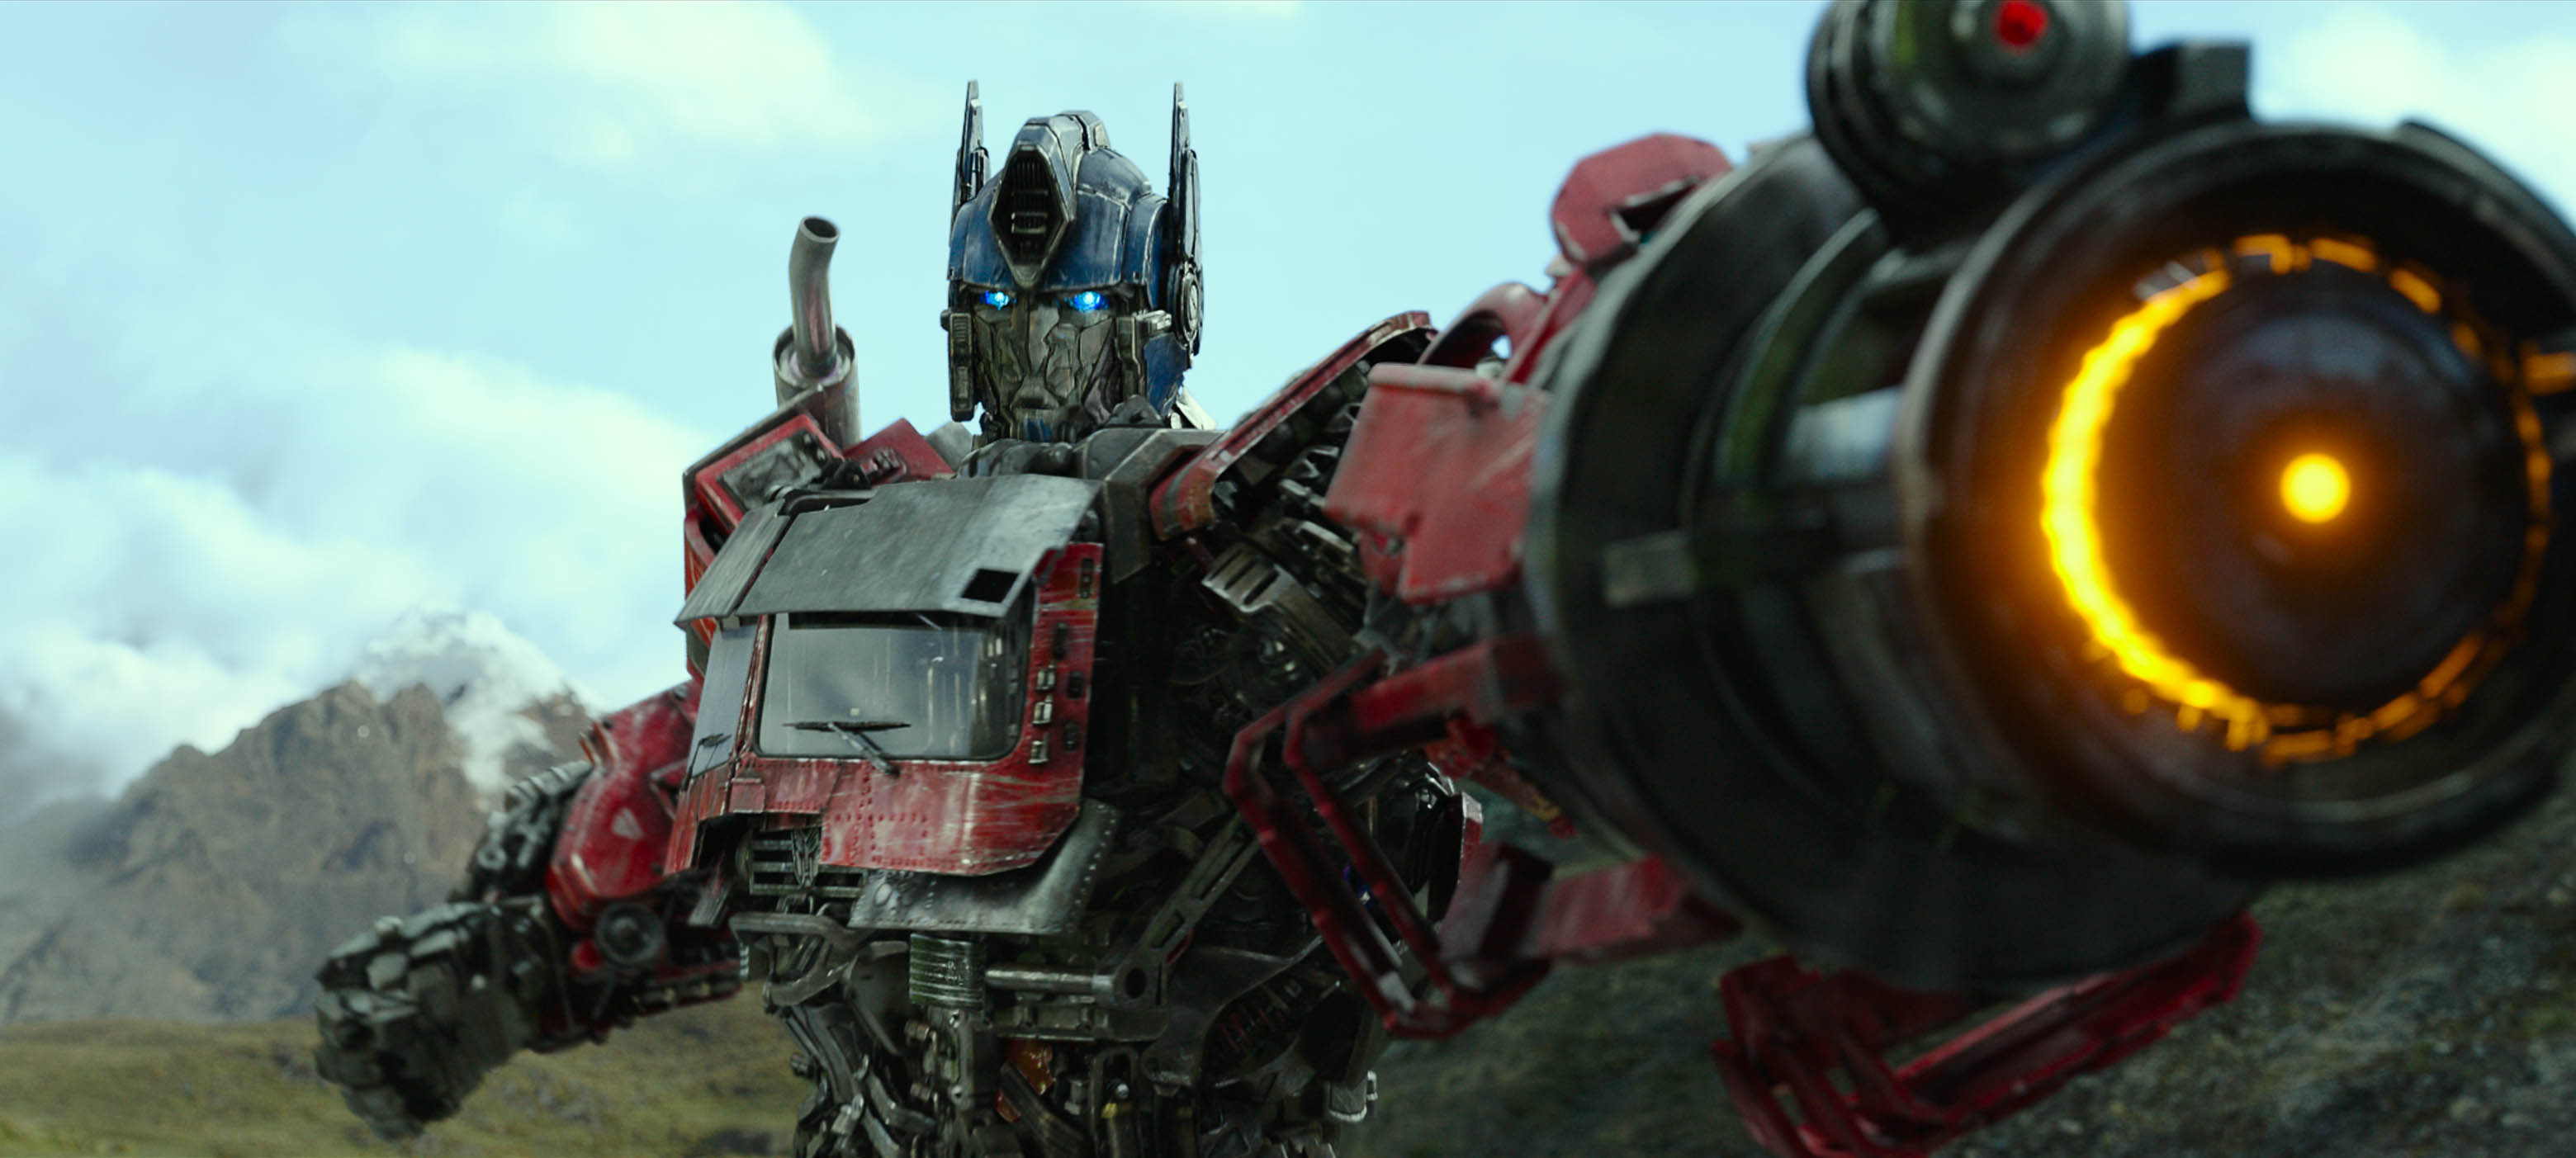 Optimus Prime holds up his big gun arm in Transformers: Rise of the Beasts